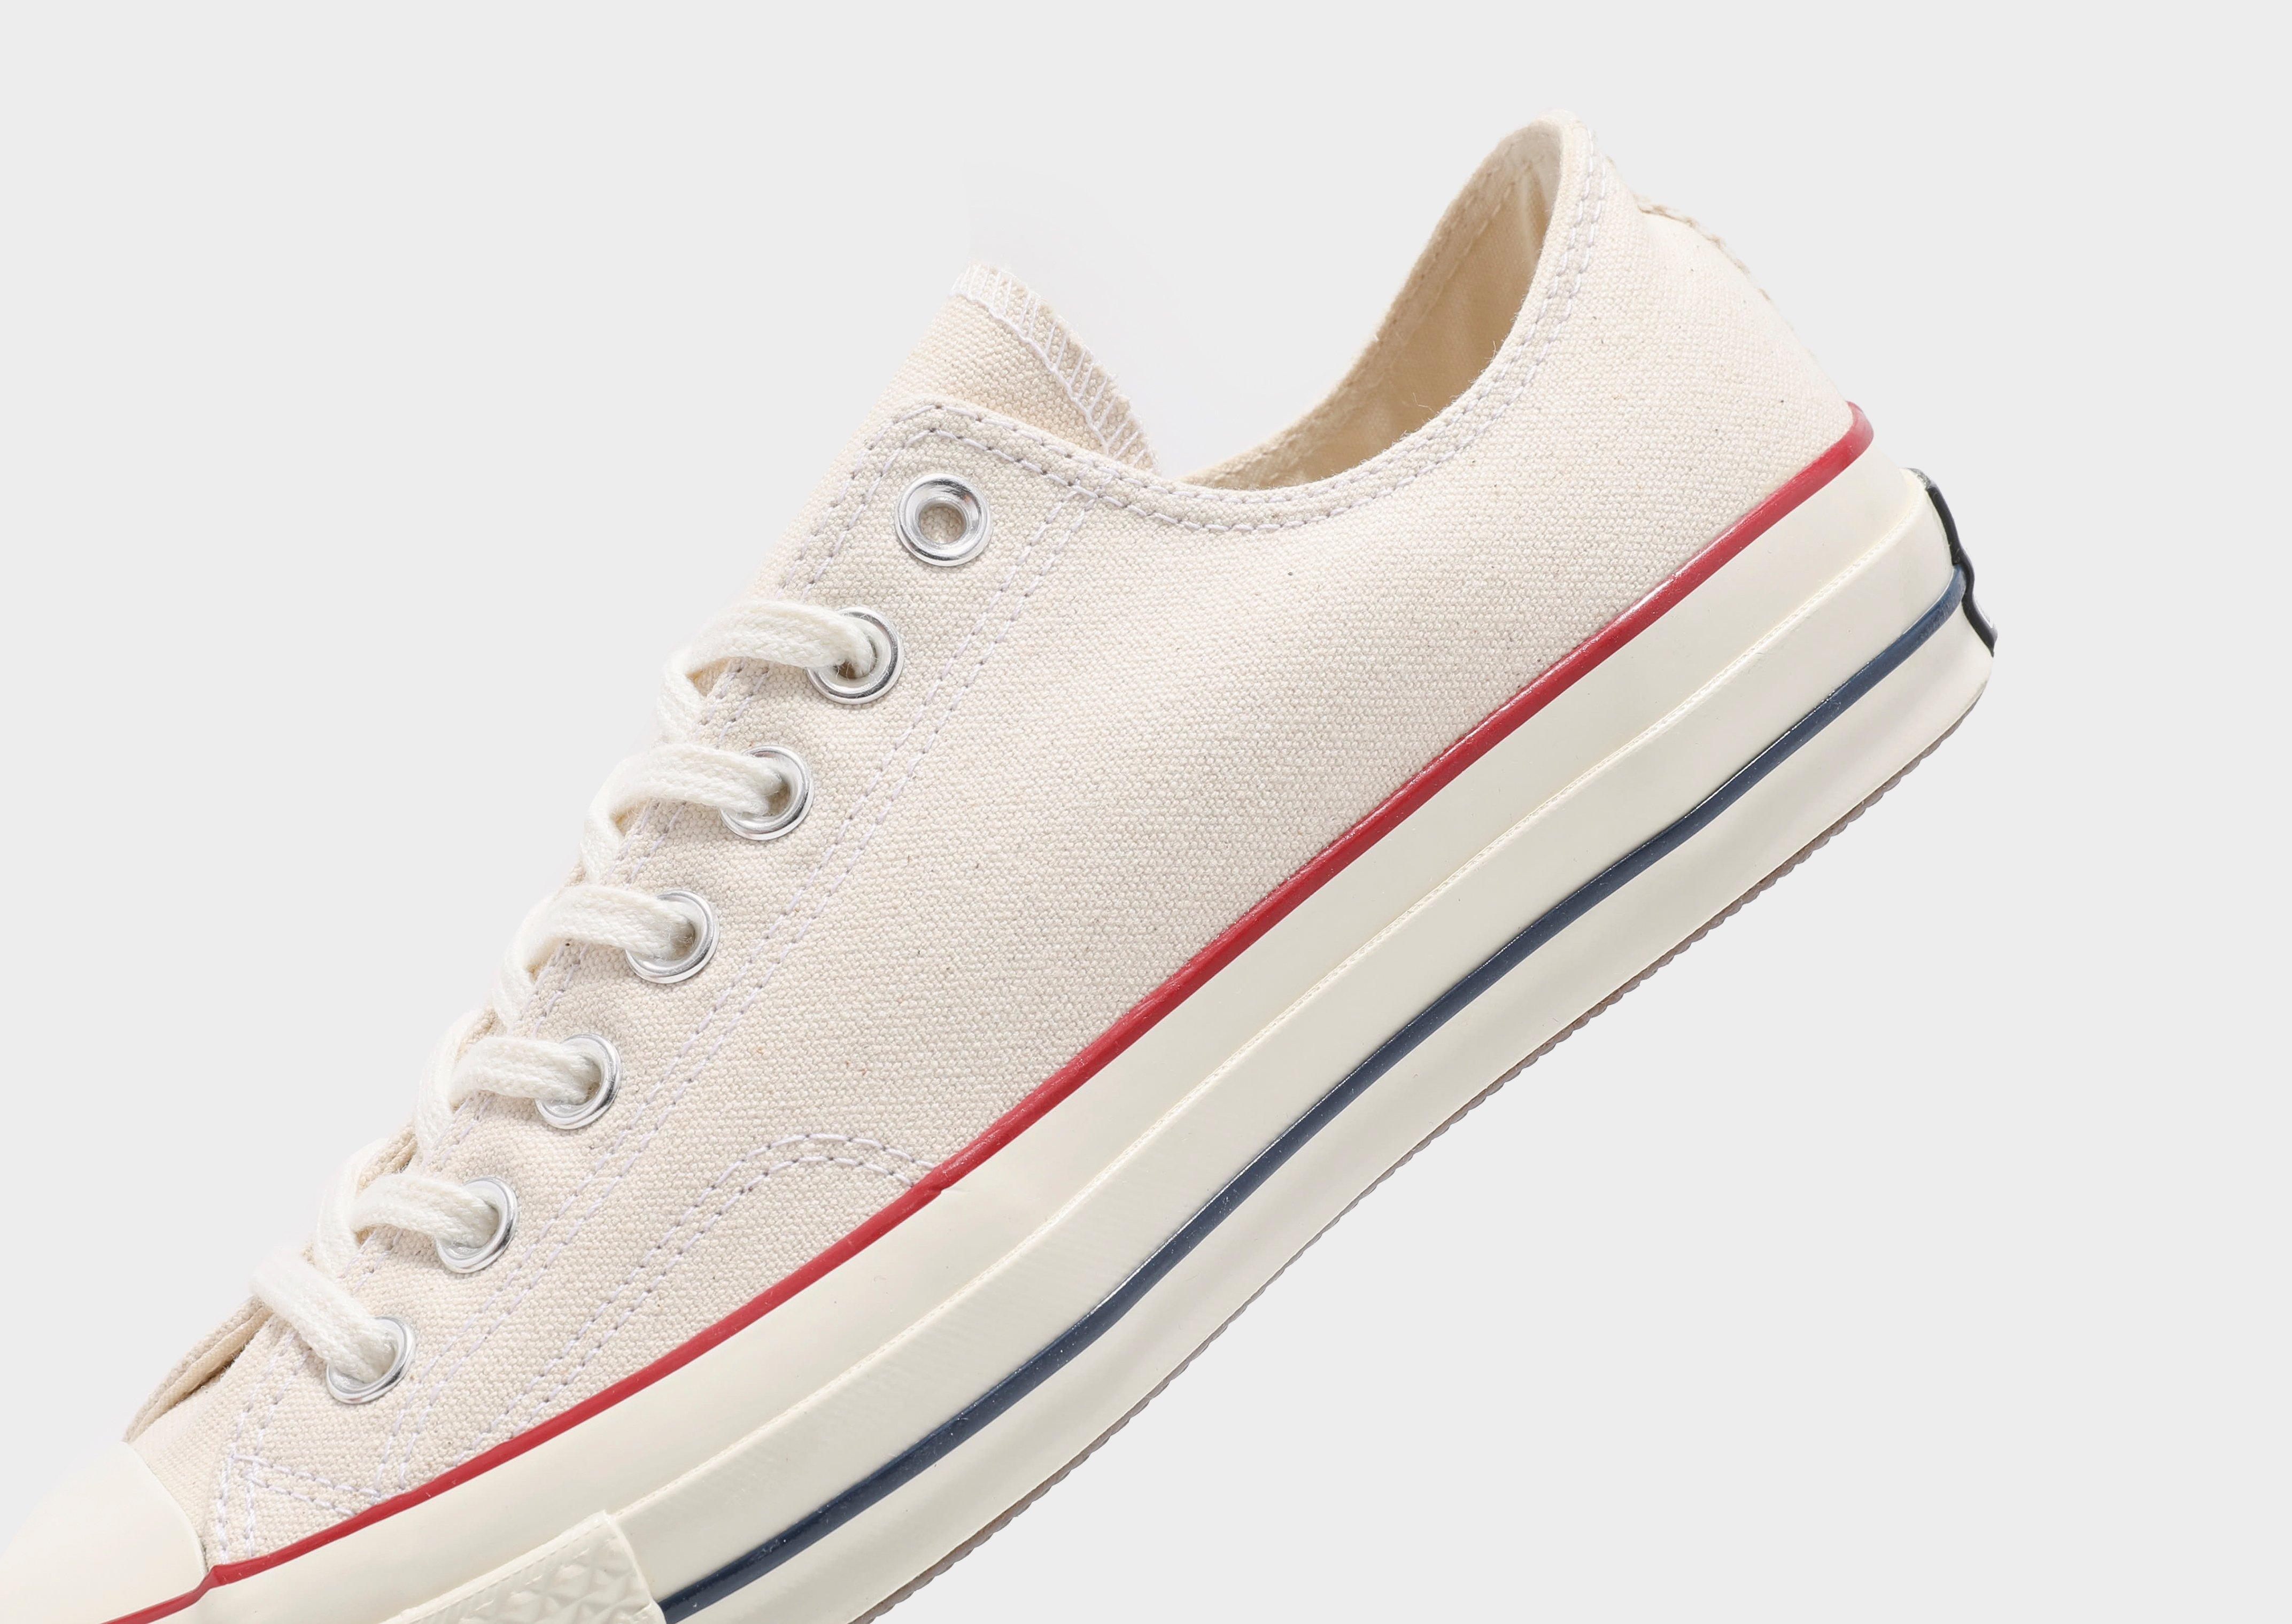 converse chuck taylor all star 70's low